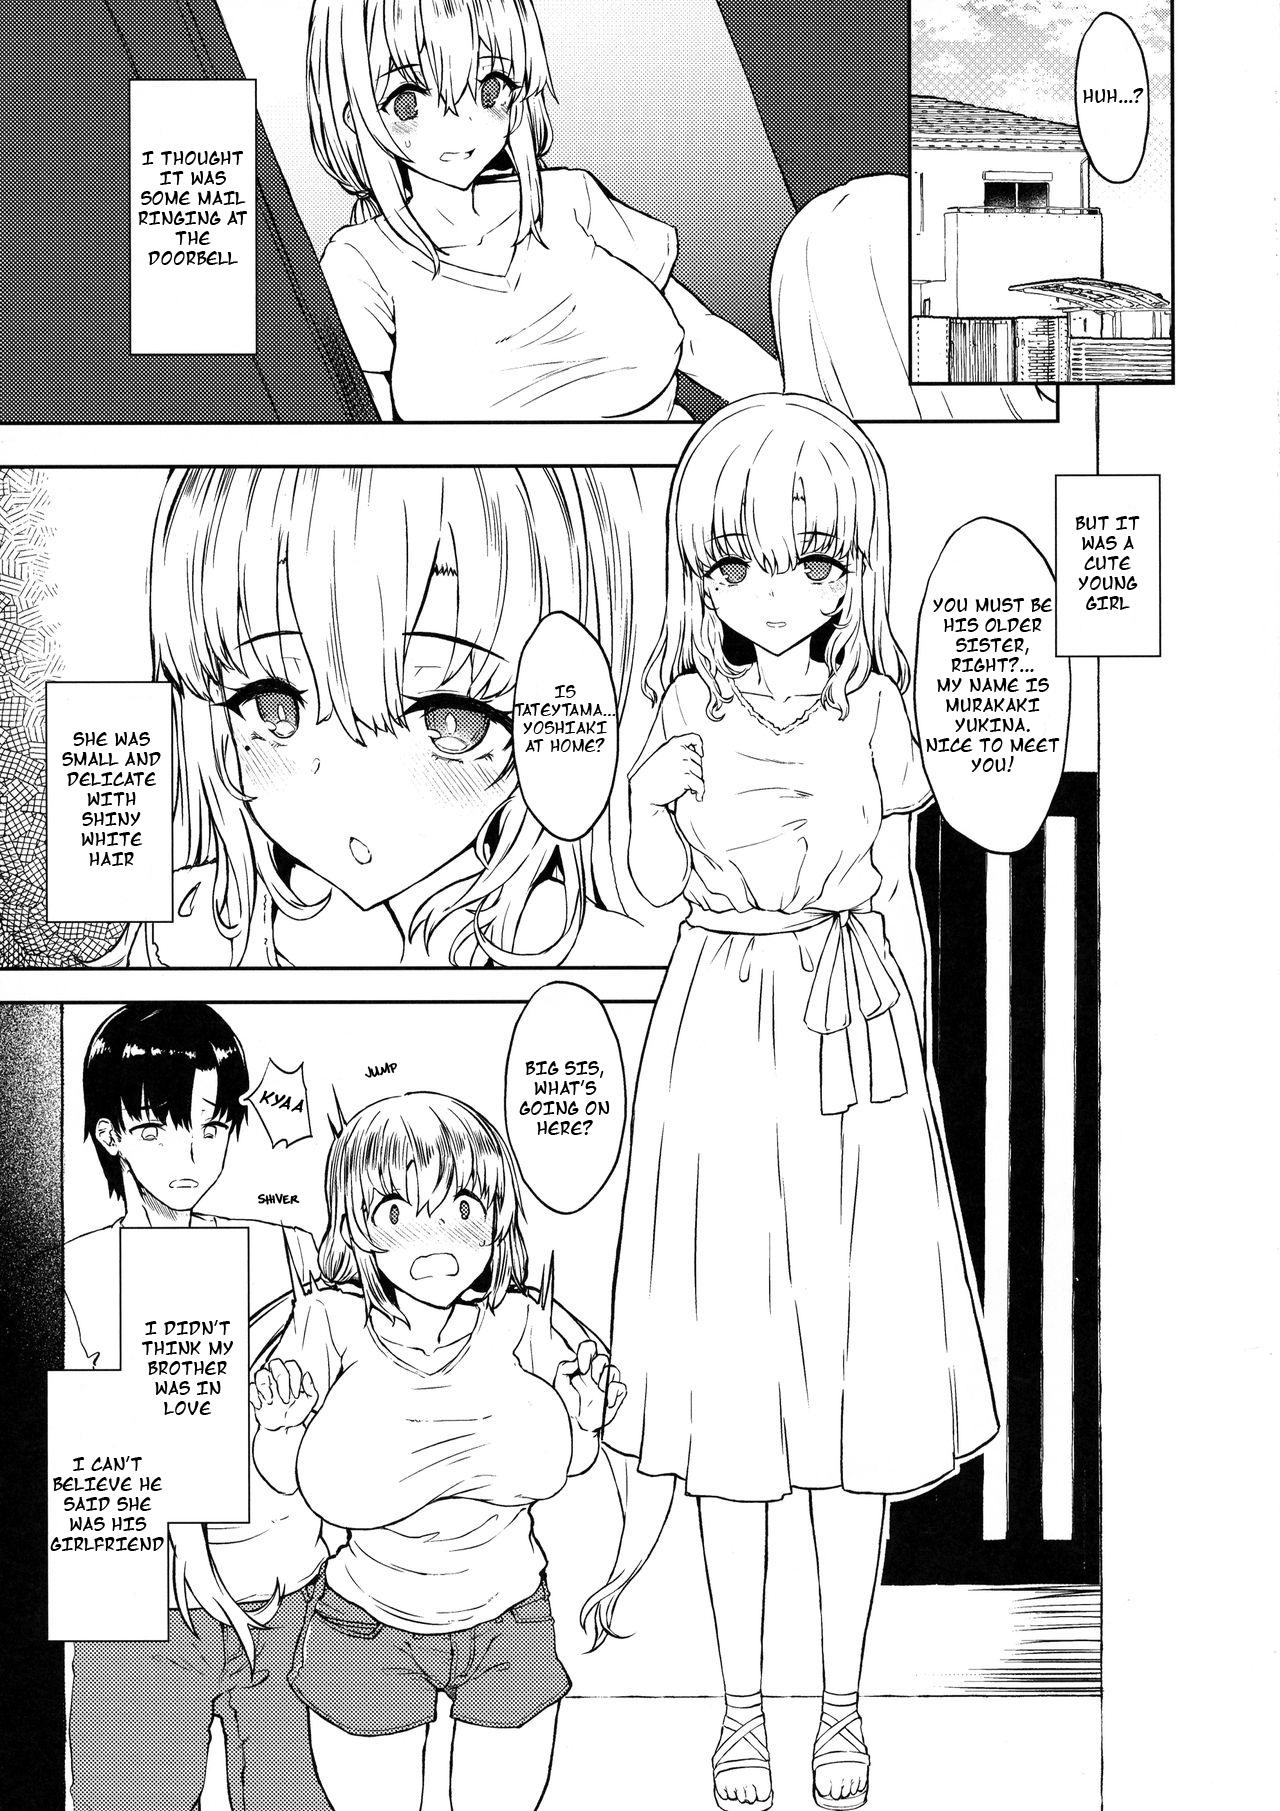 Otouto no Kanojo | My Younger Brother's Girlfriend 3